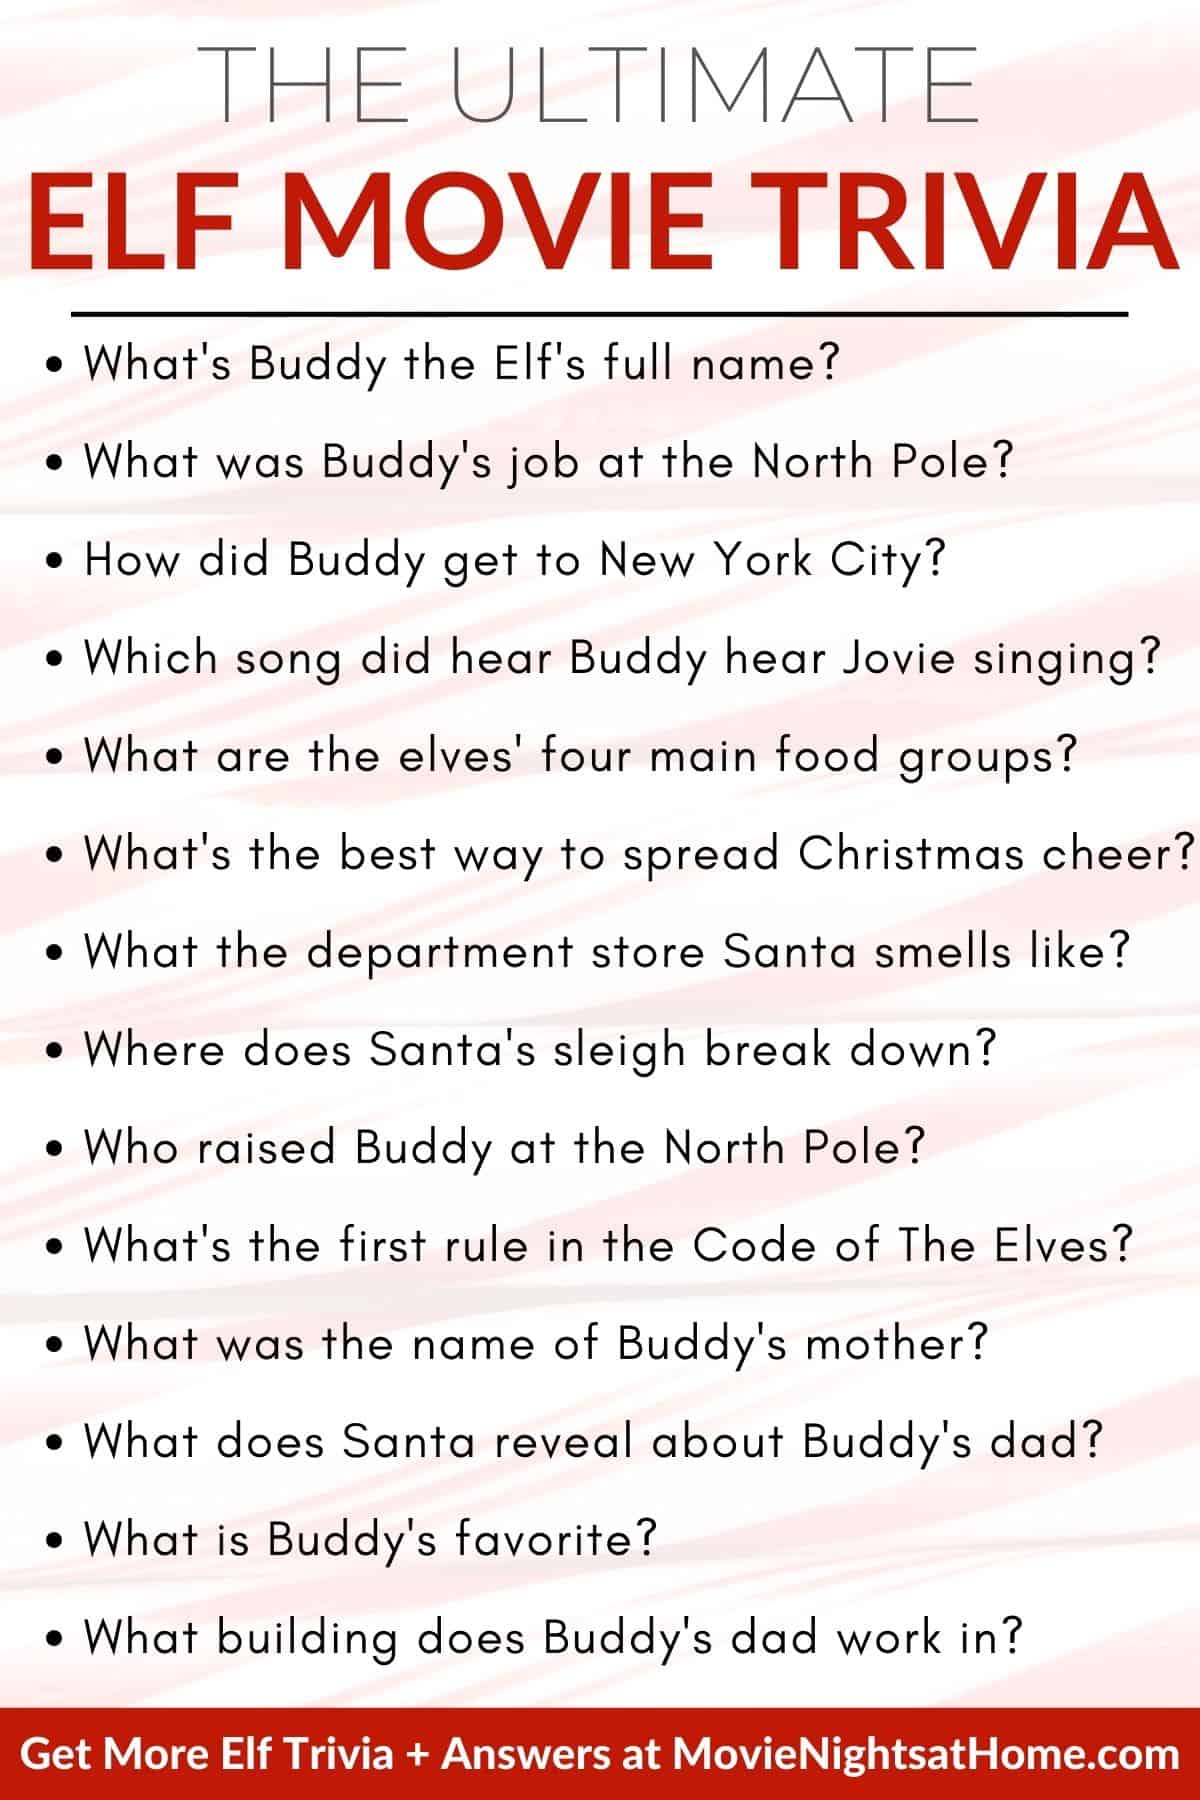 Ultimate Elf Movie Trivia Questions and Answers